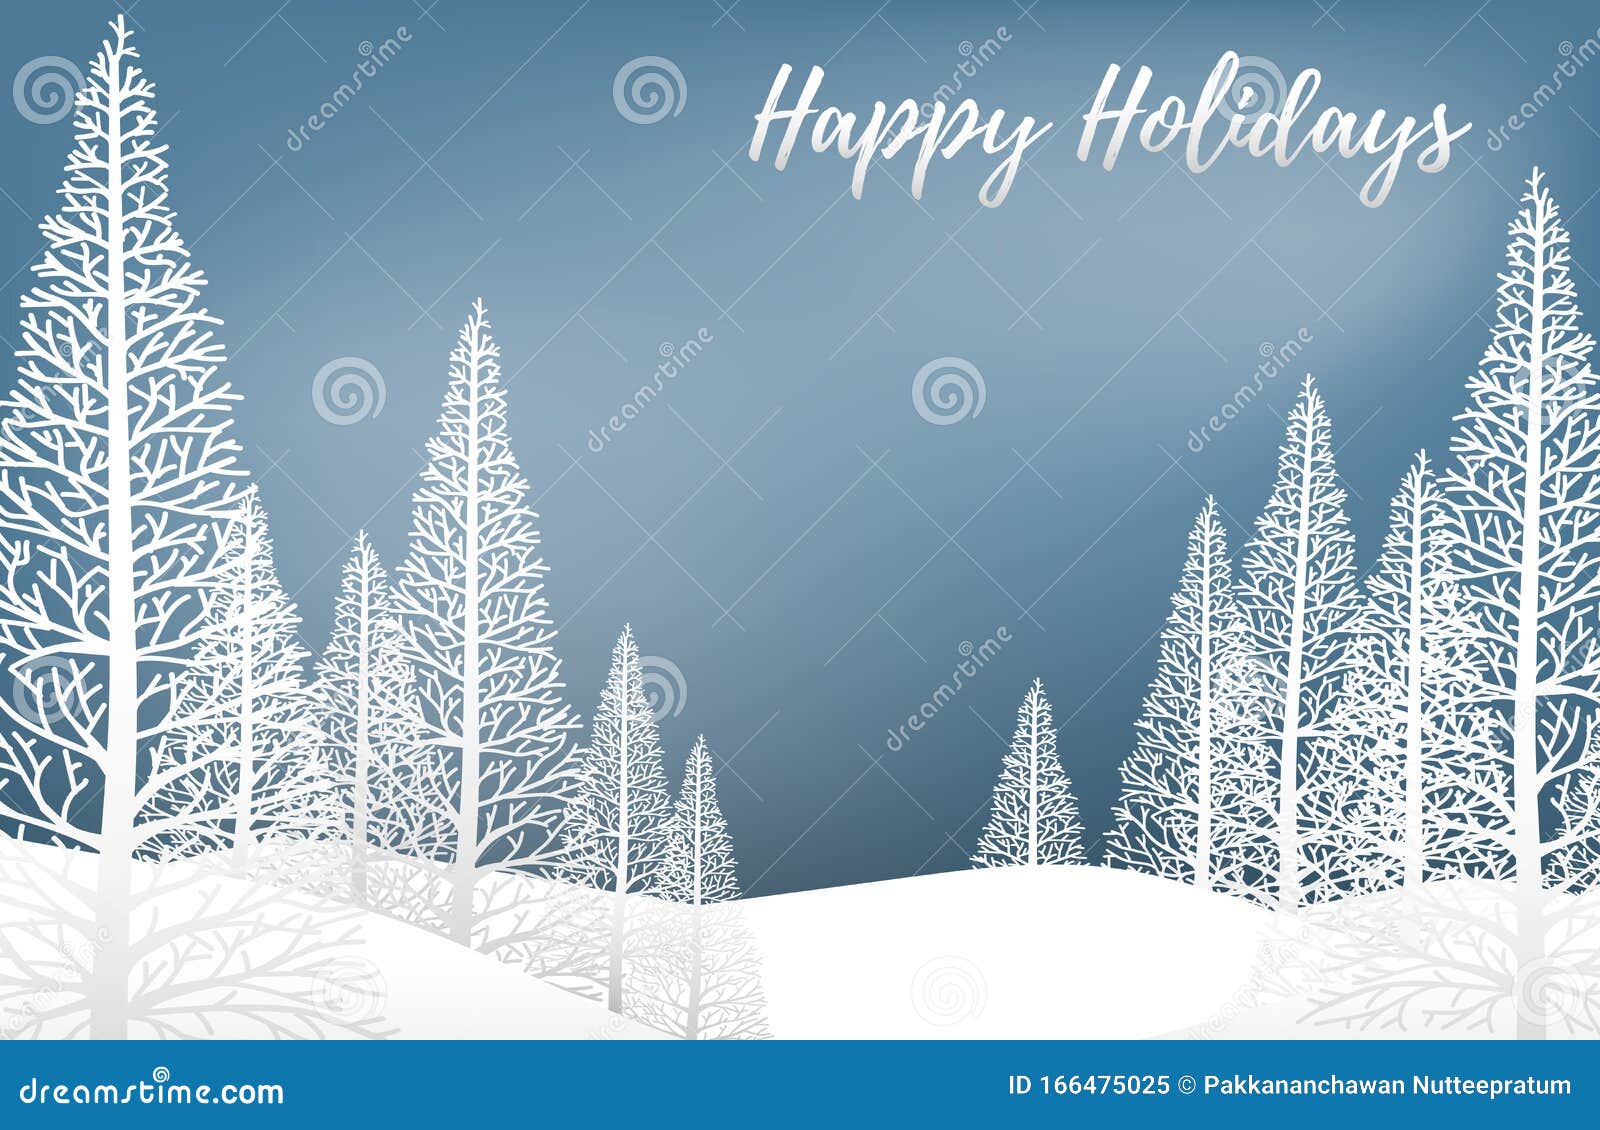 landscape with pine trees on snow hill and happy holidays! text